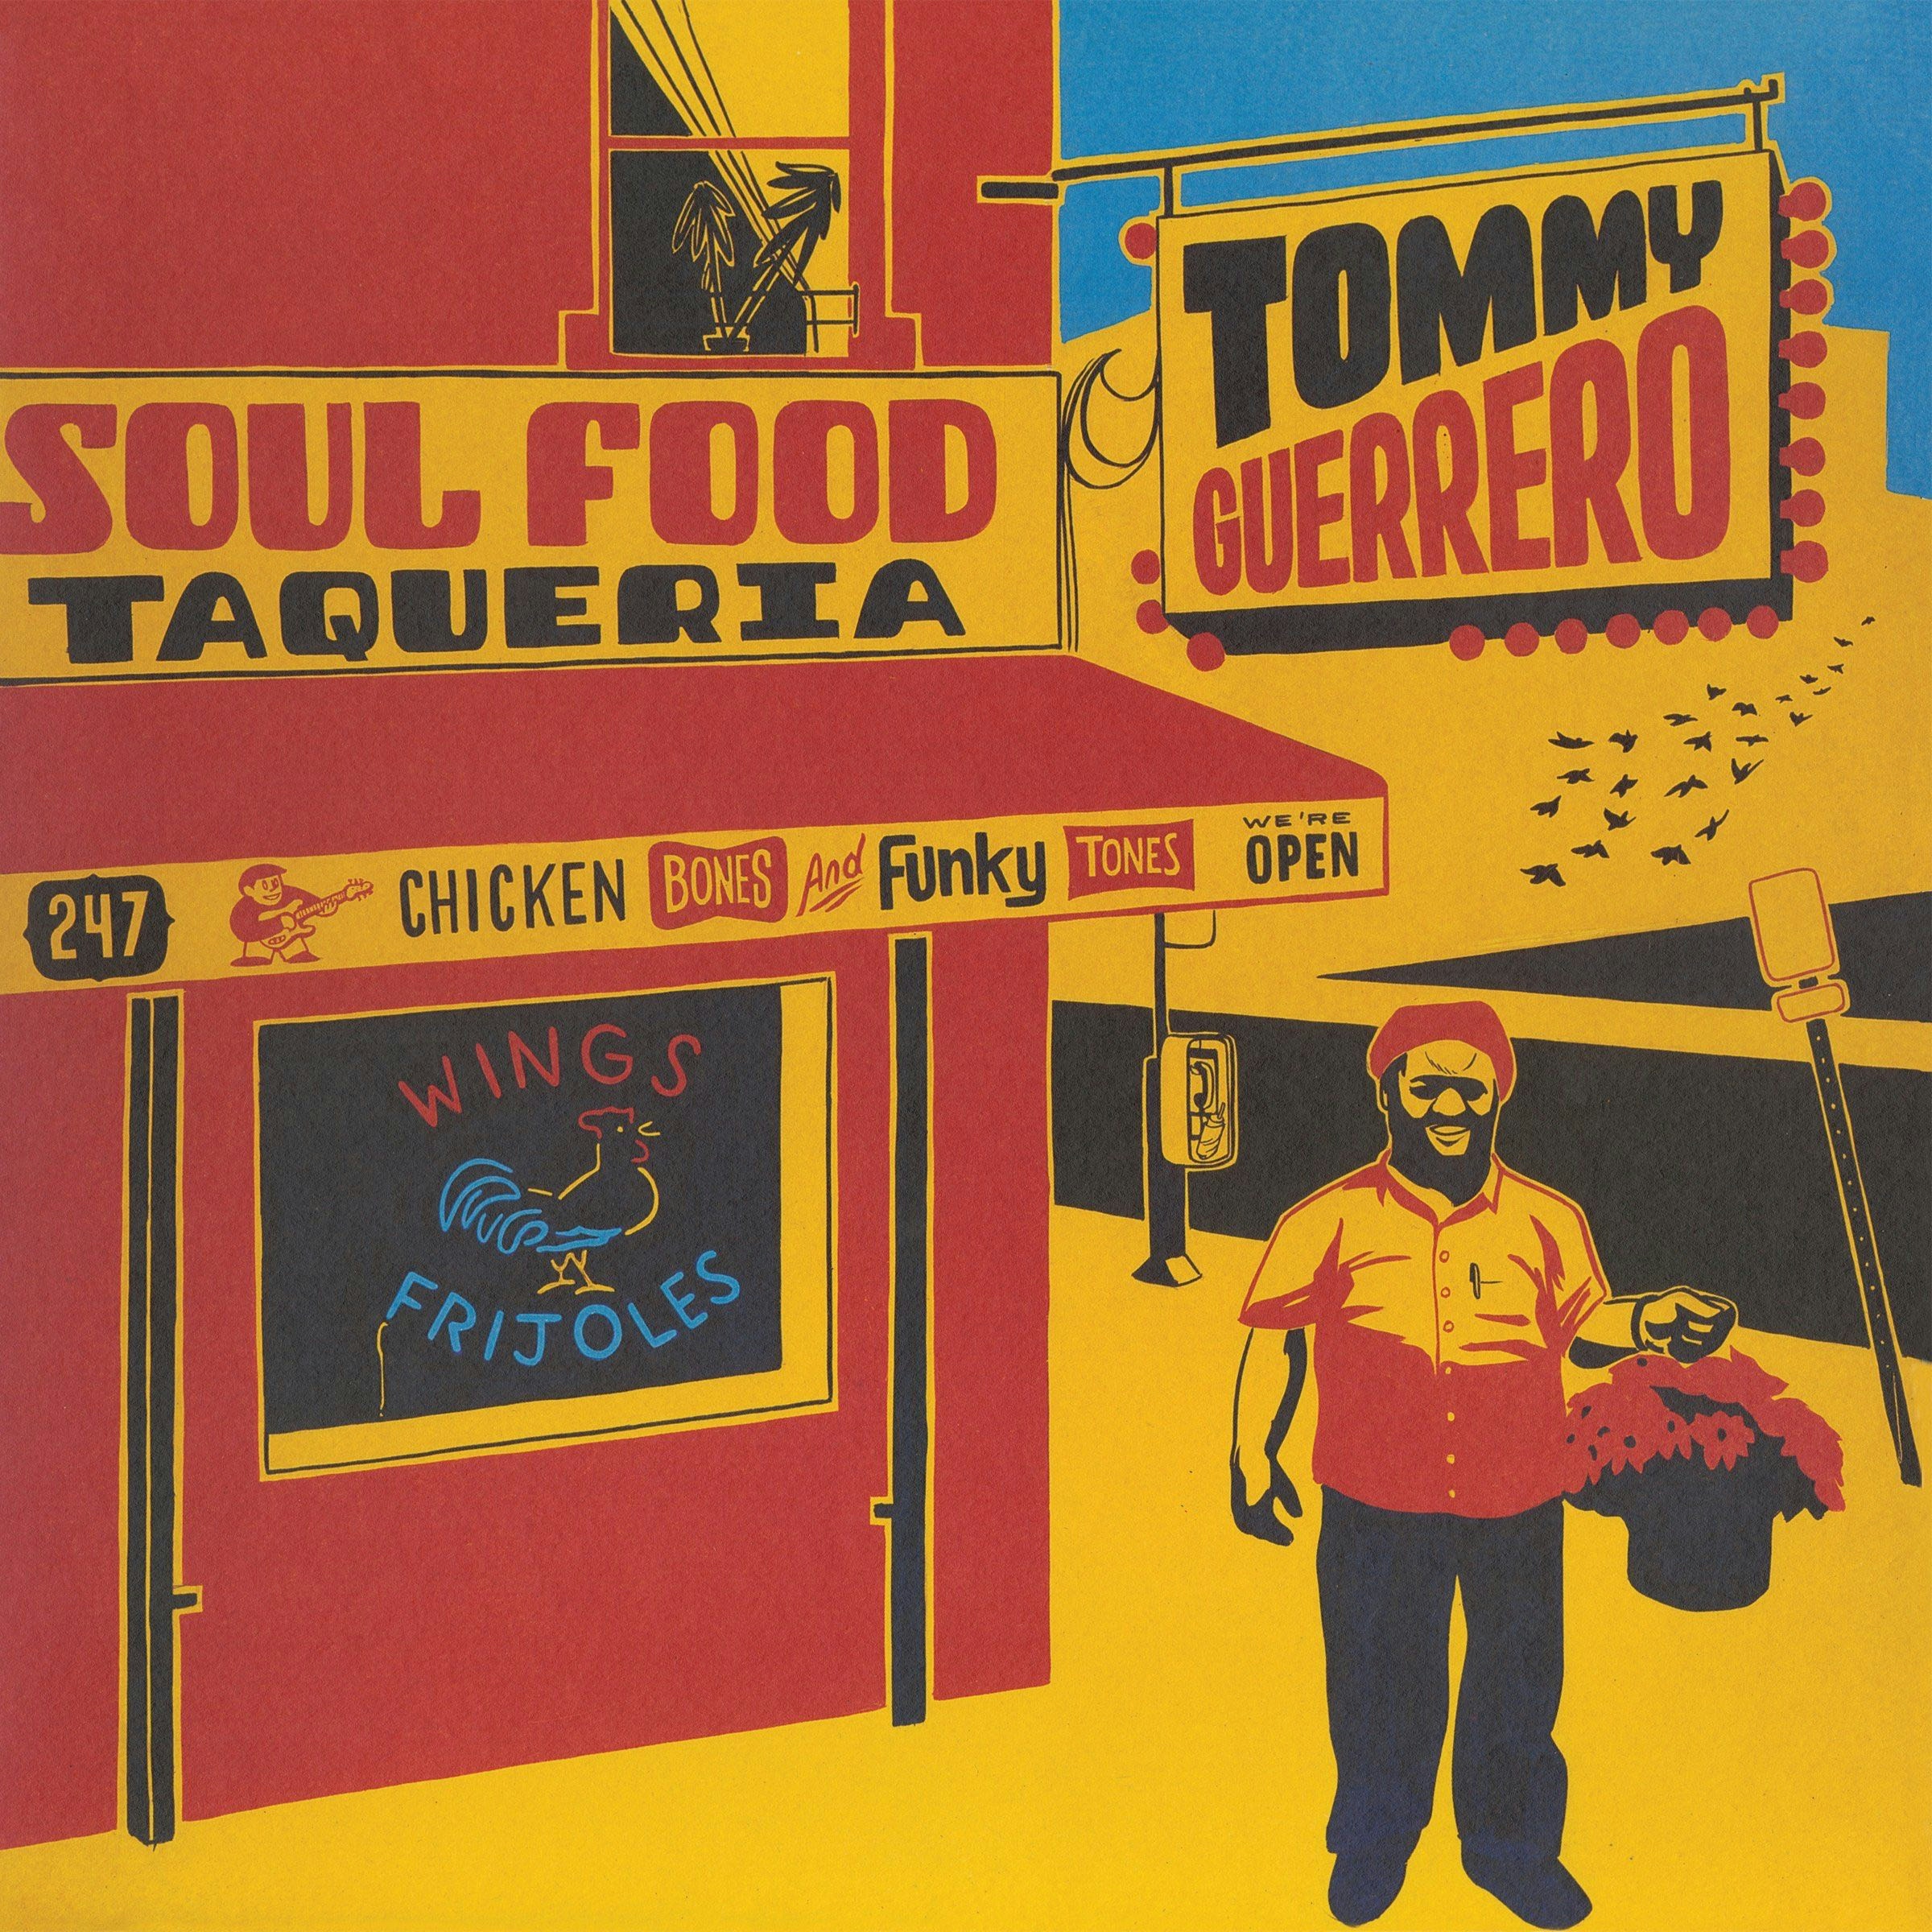 Album artwork for Album artwork for Soul Food Taqueria by Tommy Guerrero by Soul Food Taqueria - Tommy Guerrero